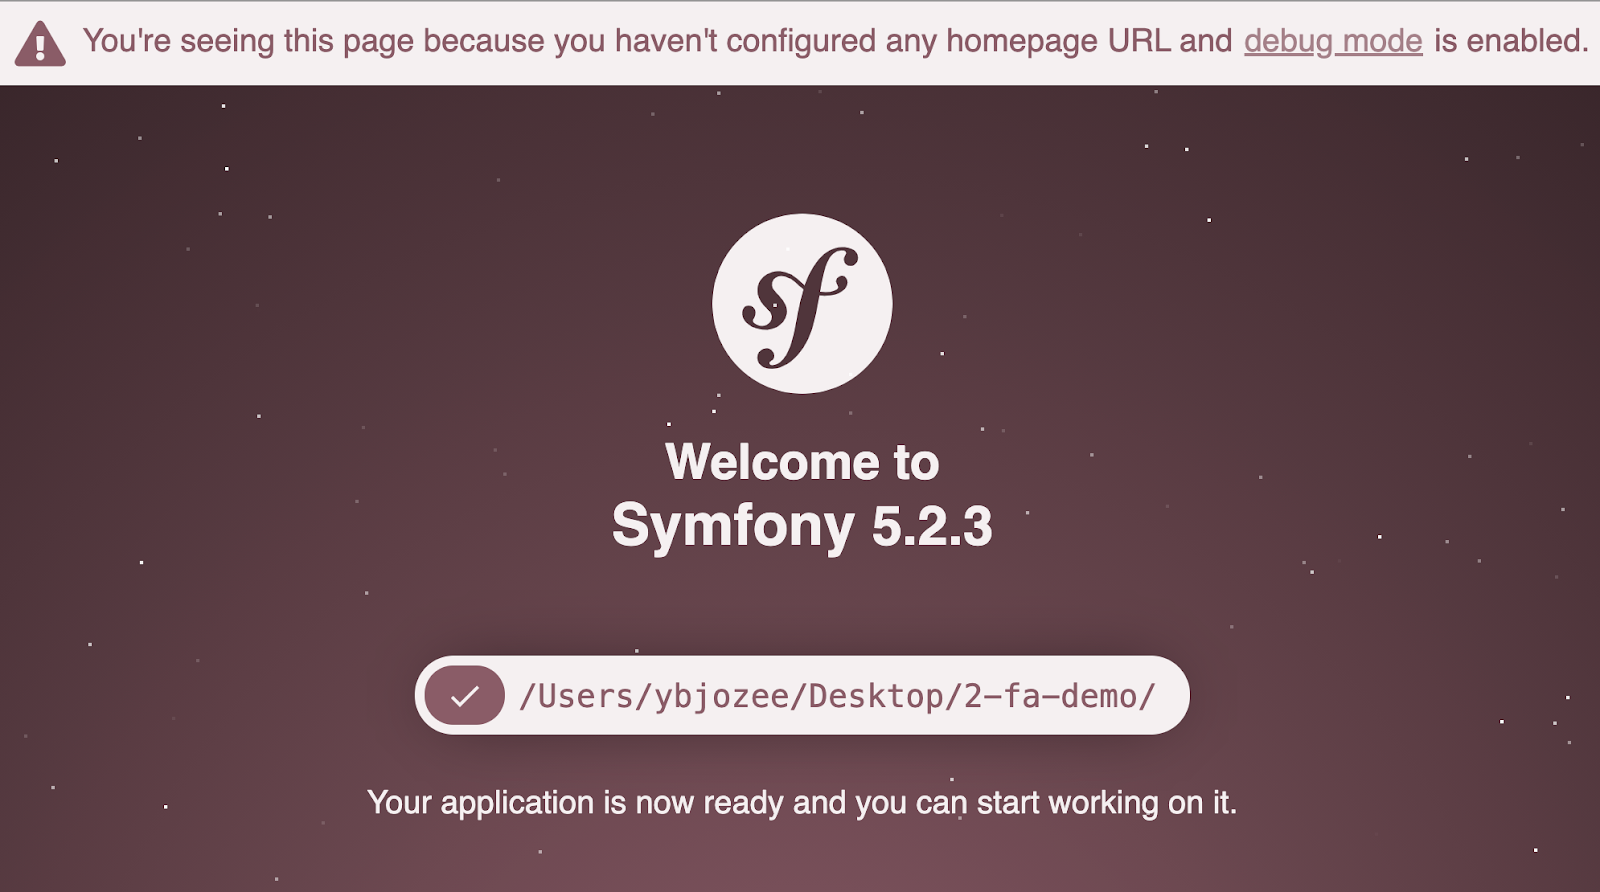 The default Symfony welcome page